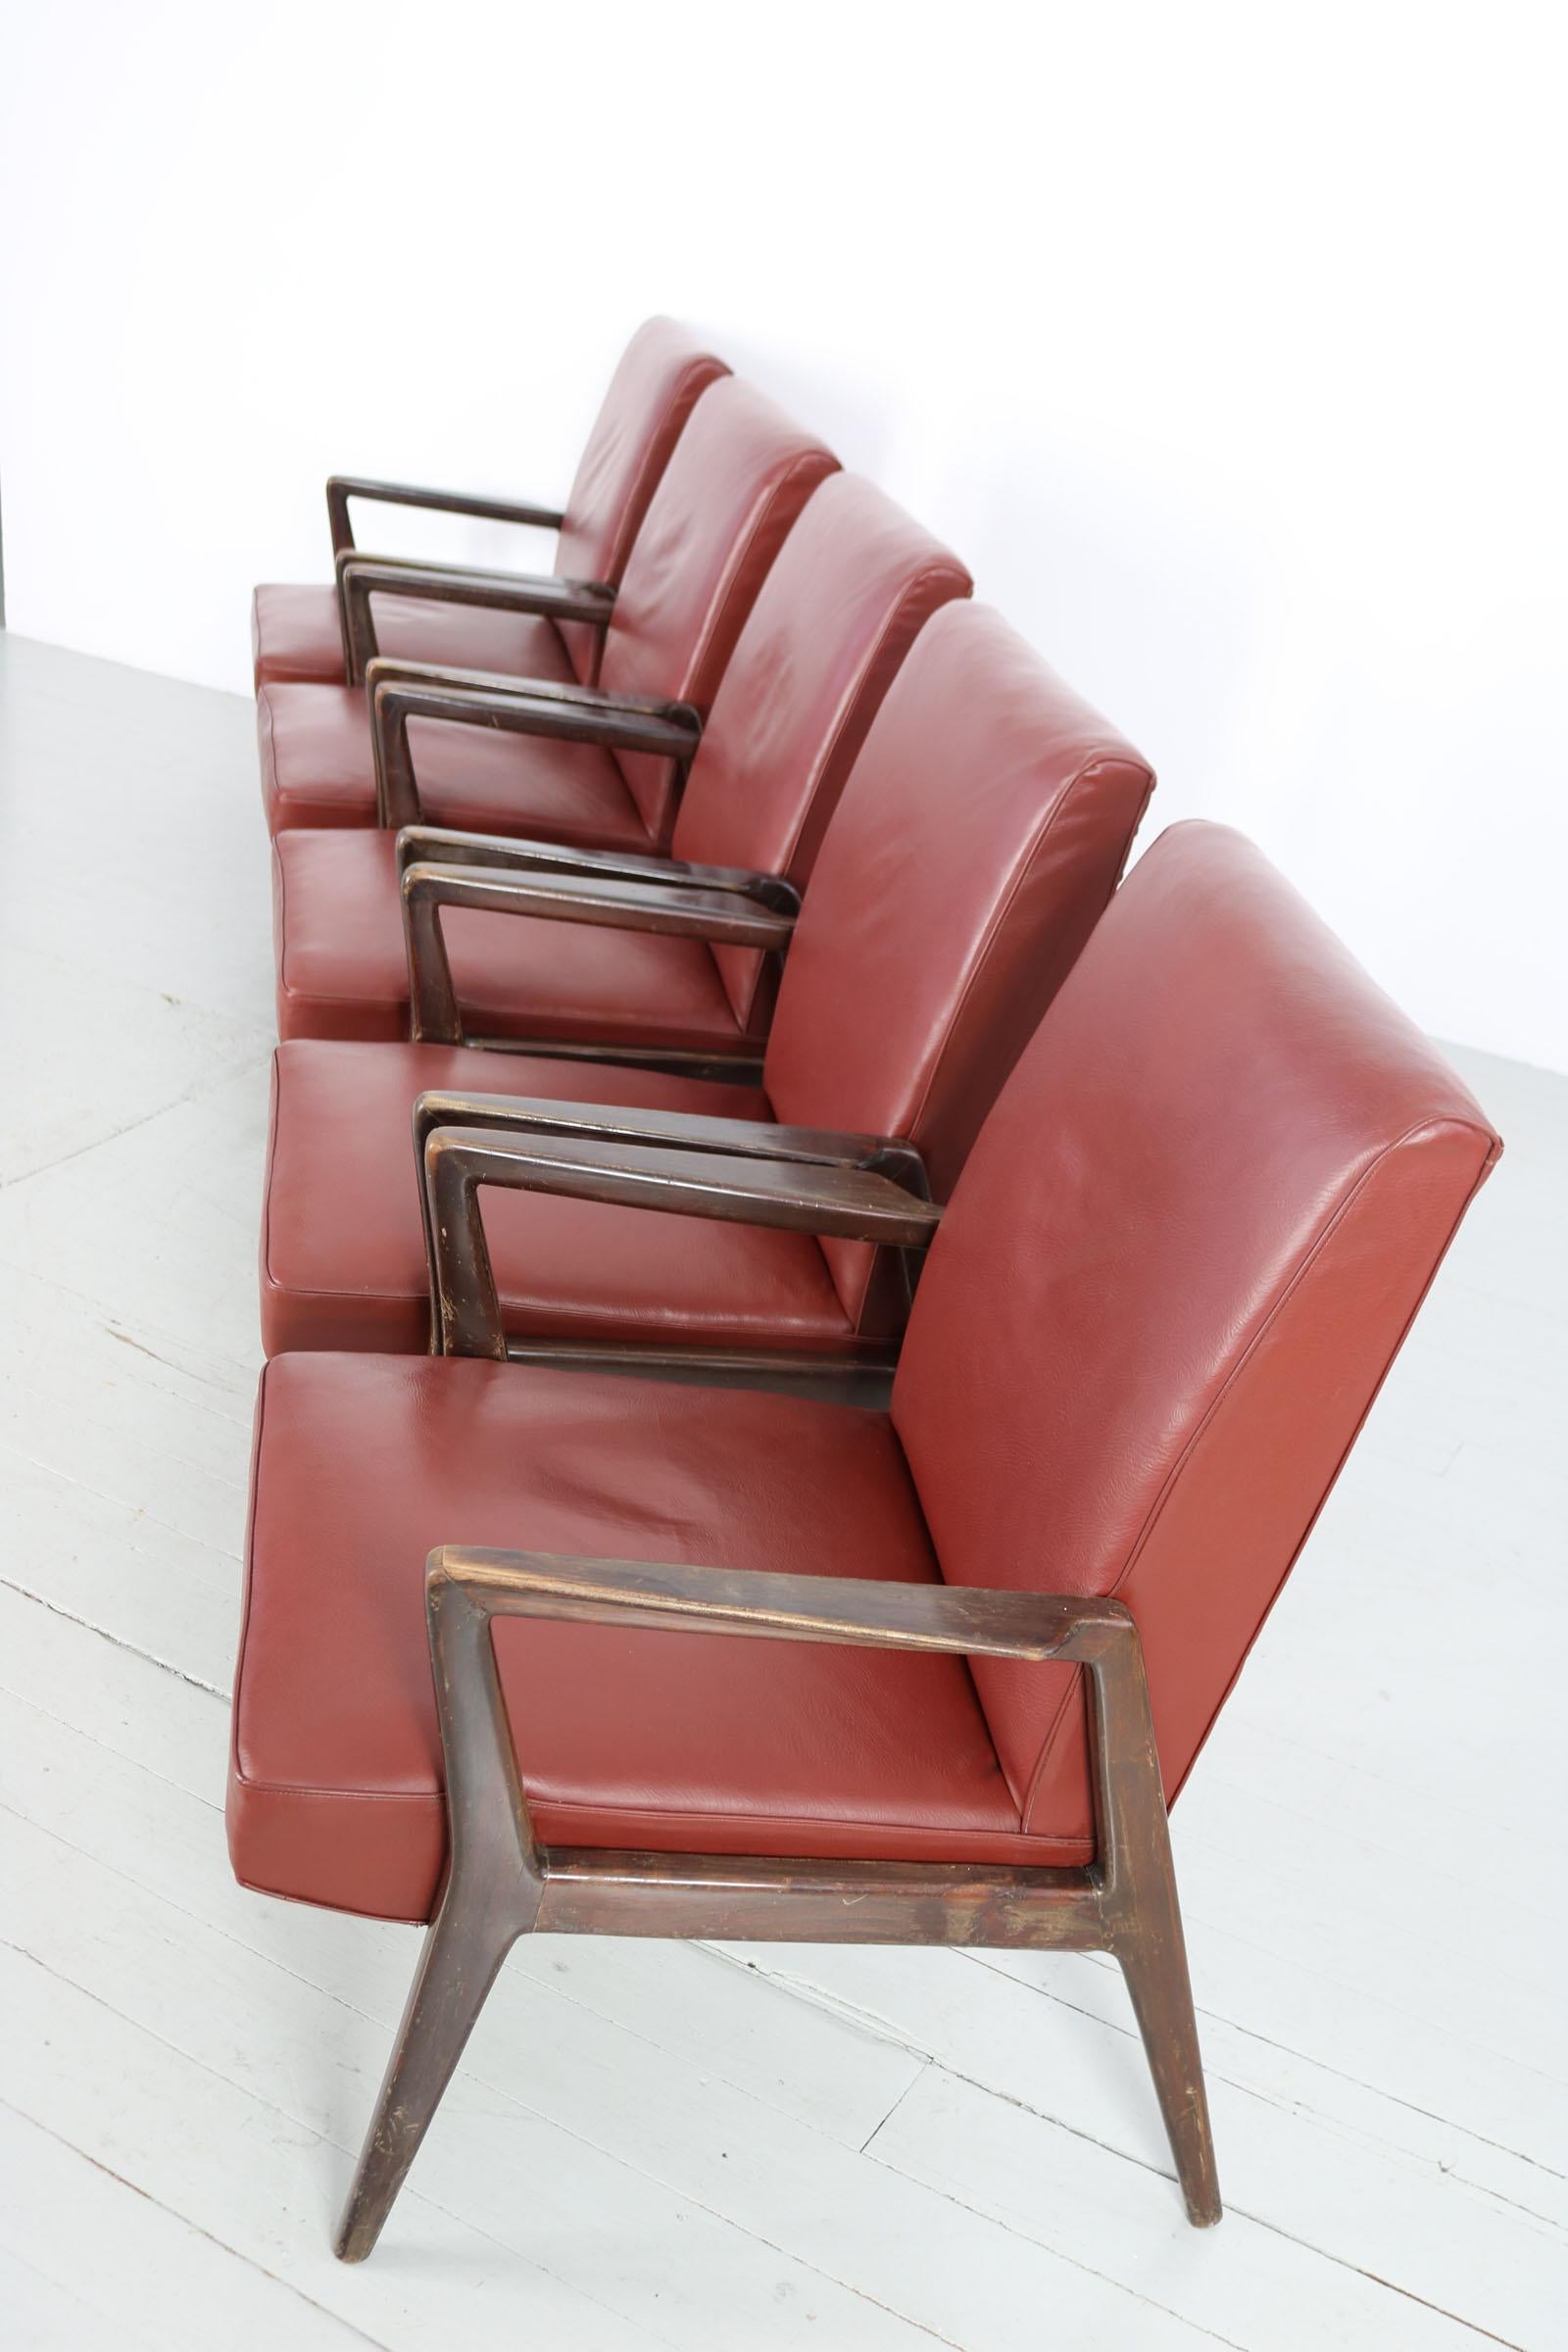 Set of 5 Dark Red Leatherette Armchairs, Italy 1960s For Sale 10